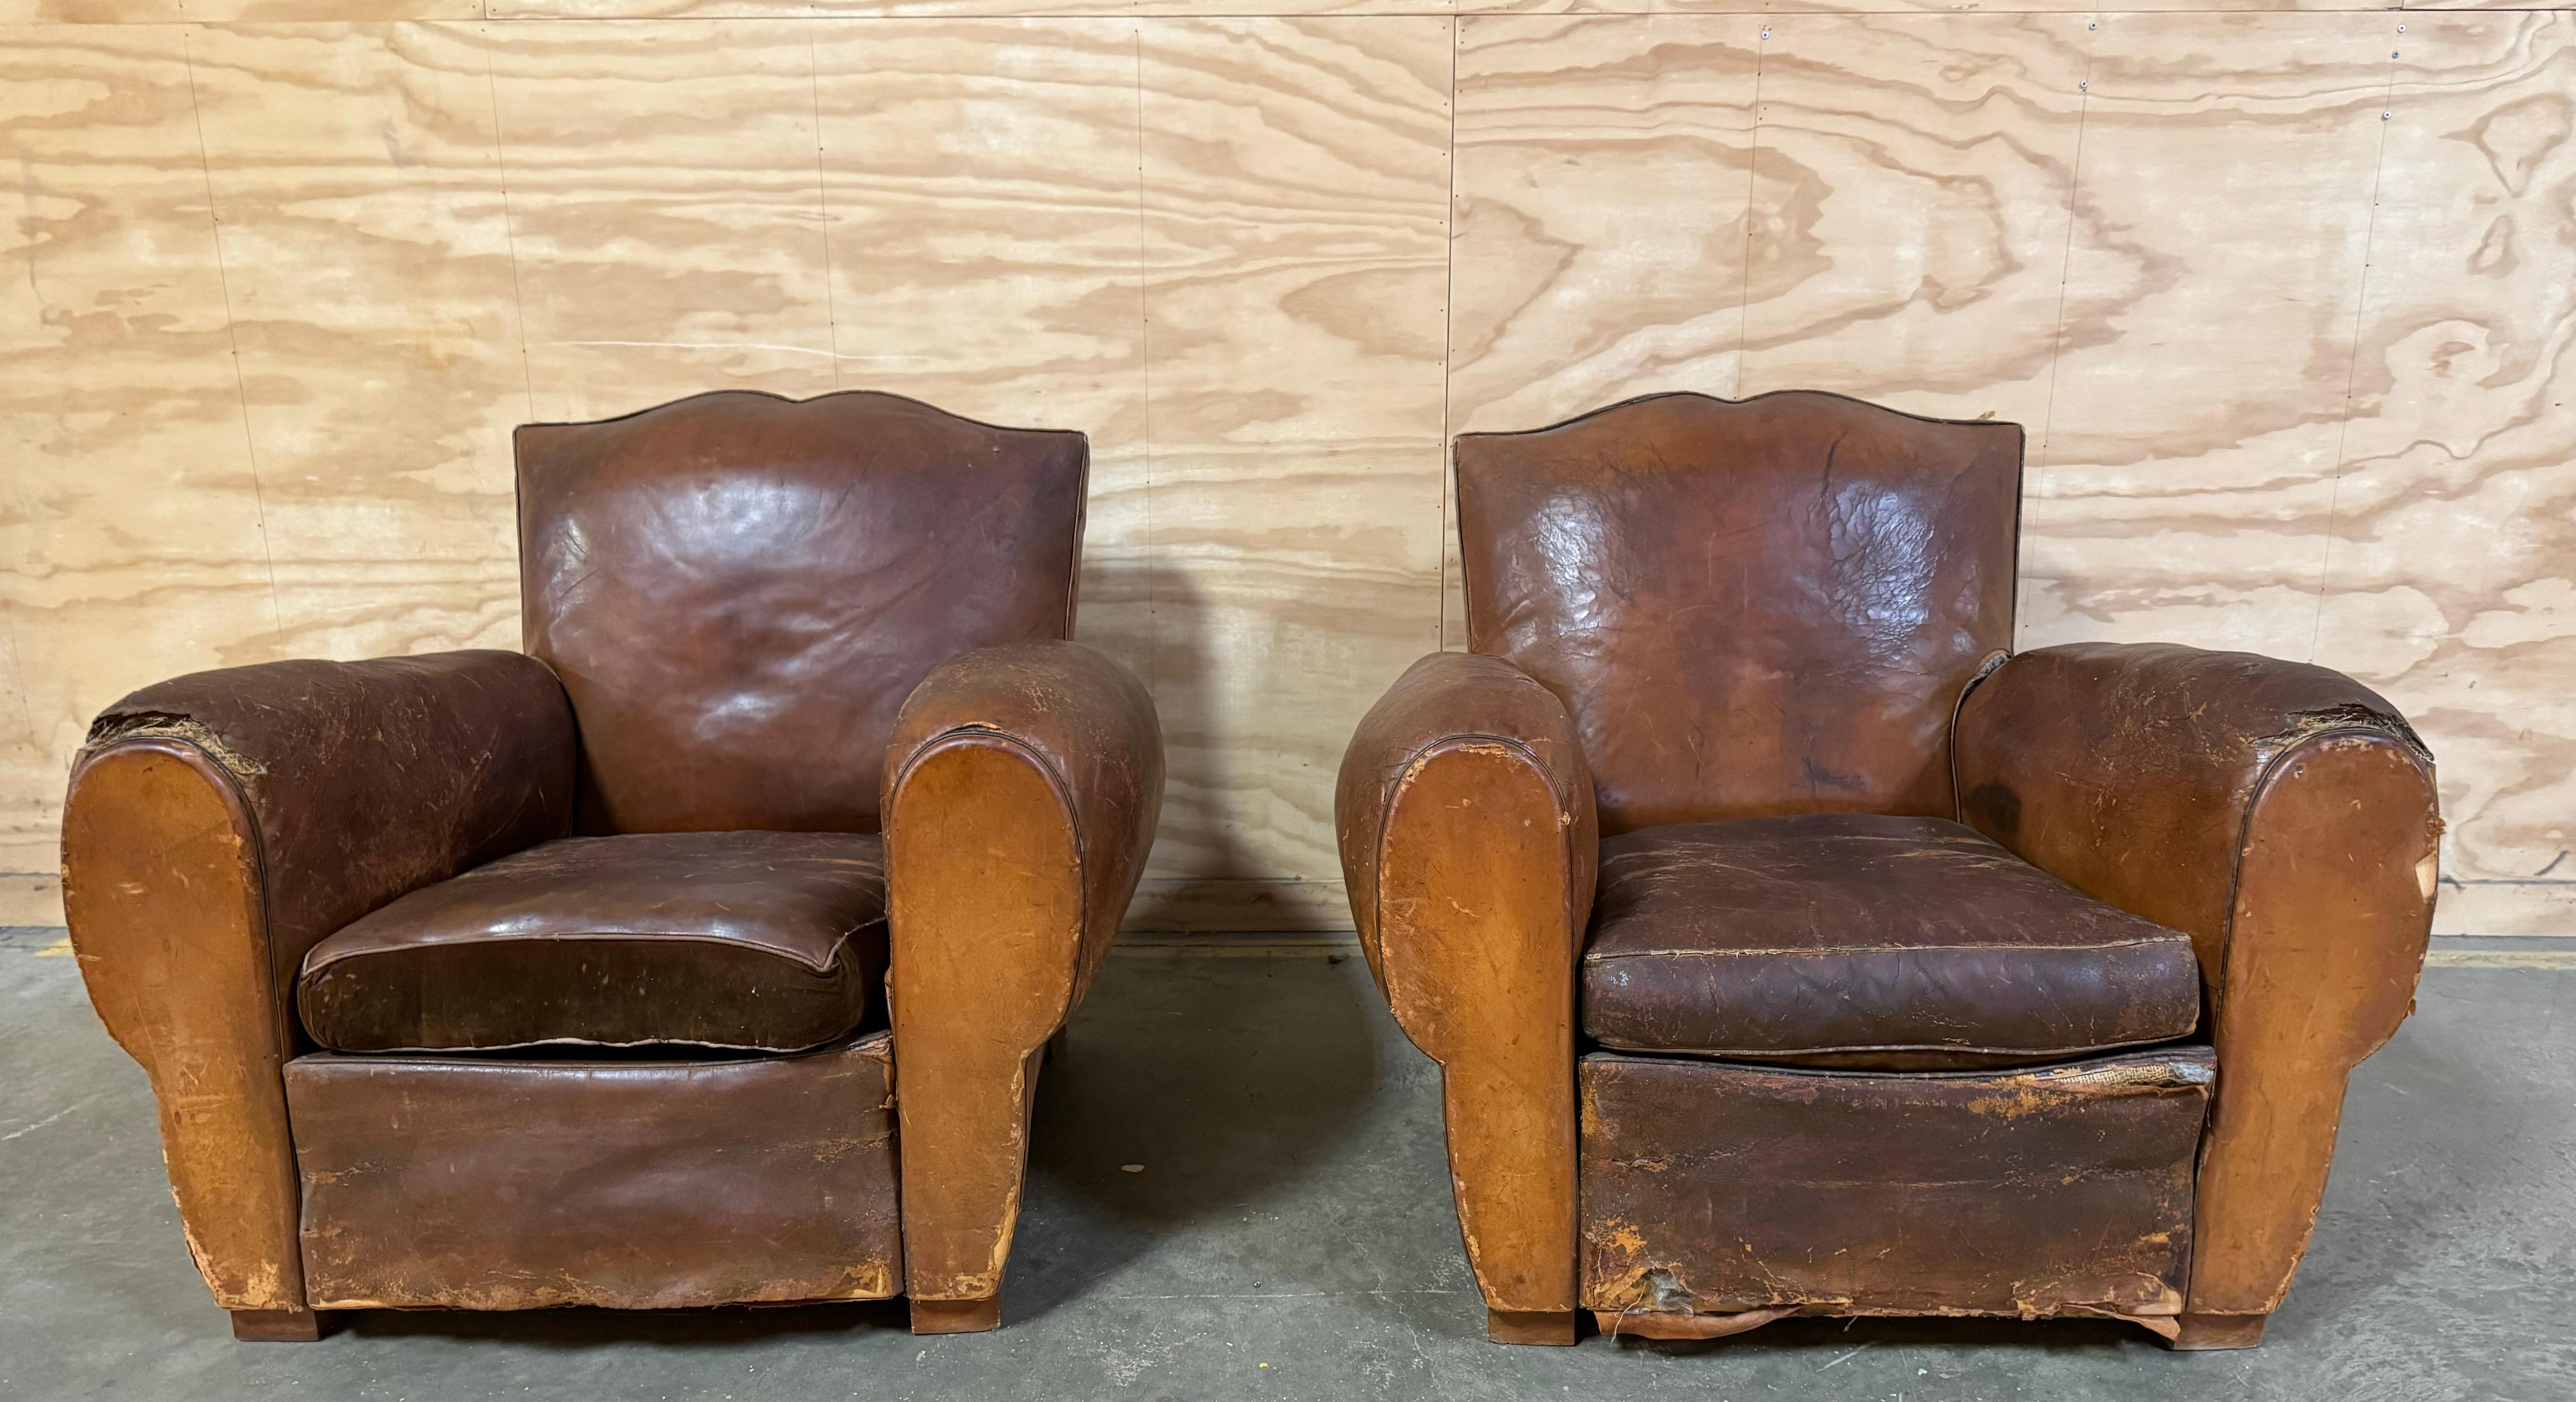 A pair of Large Vintage Art Deco Distressed Leather French Club Chairs.

All original.

Details:
Very fine patina to the leather.

Seat cushions reverse from leather on one side to brown velvet on the other side.

Brass stud trim to back.

Wood